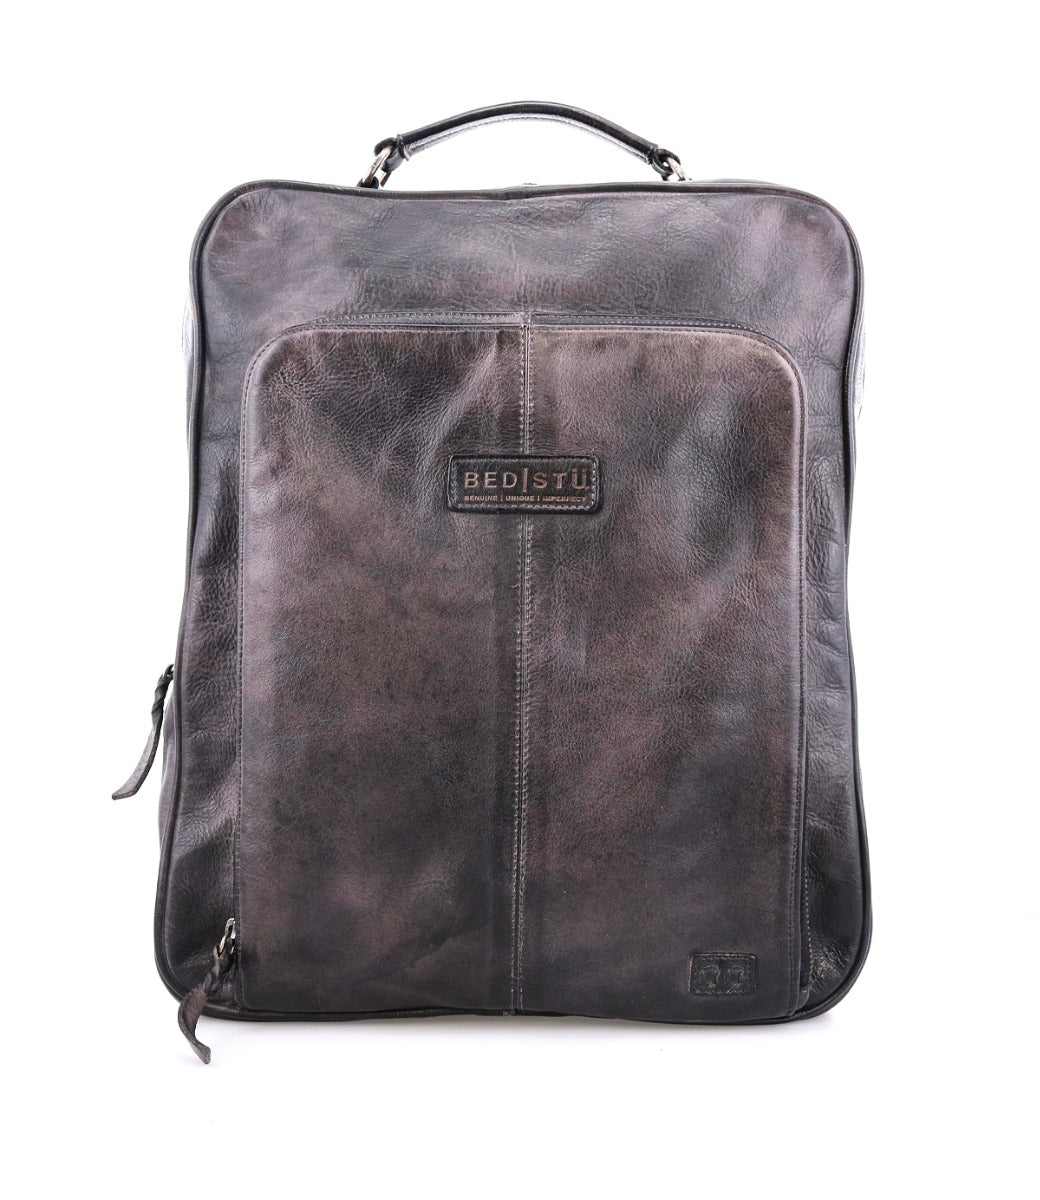 A grey leather Rozes backpack with a zipper, from Bed Stu.